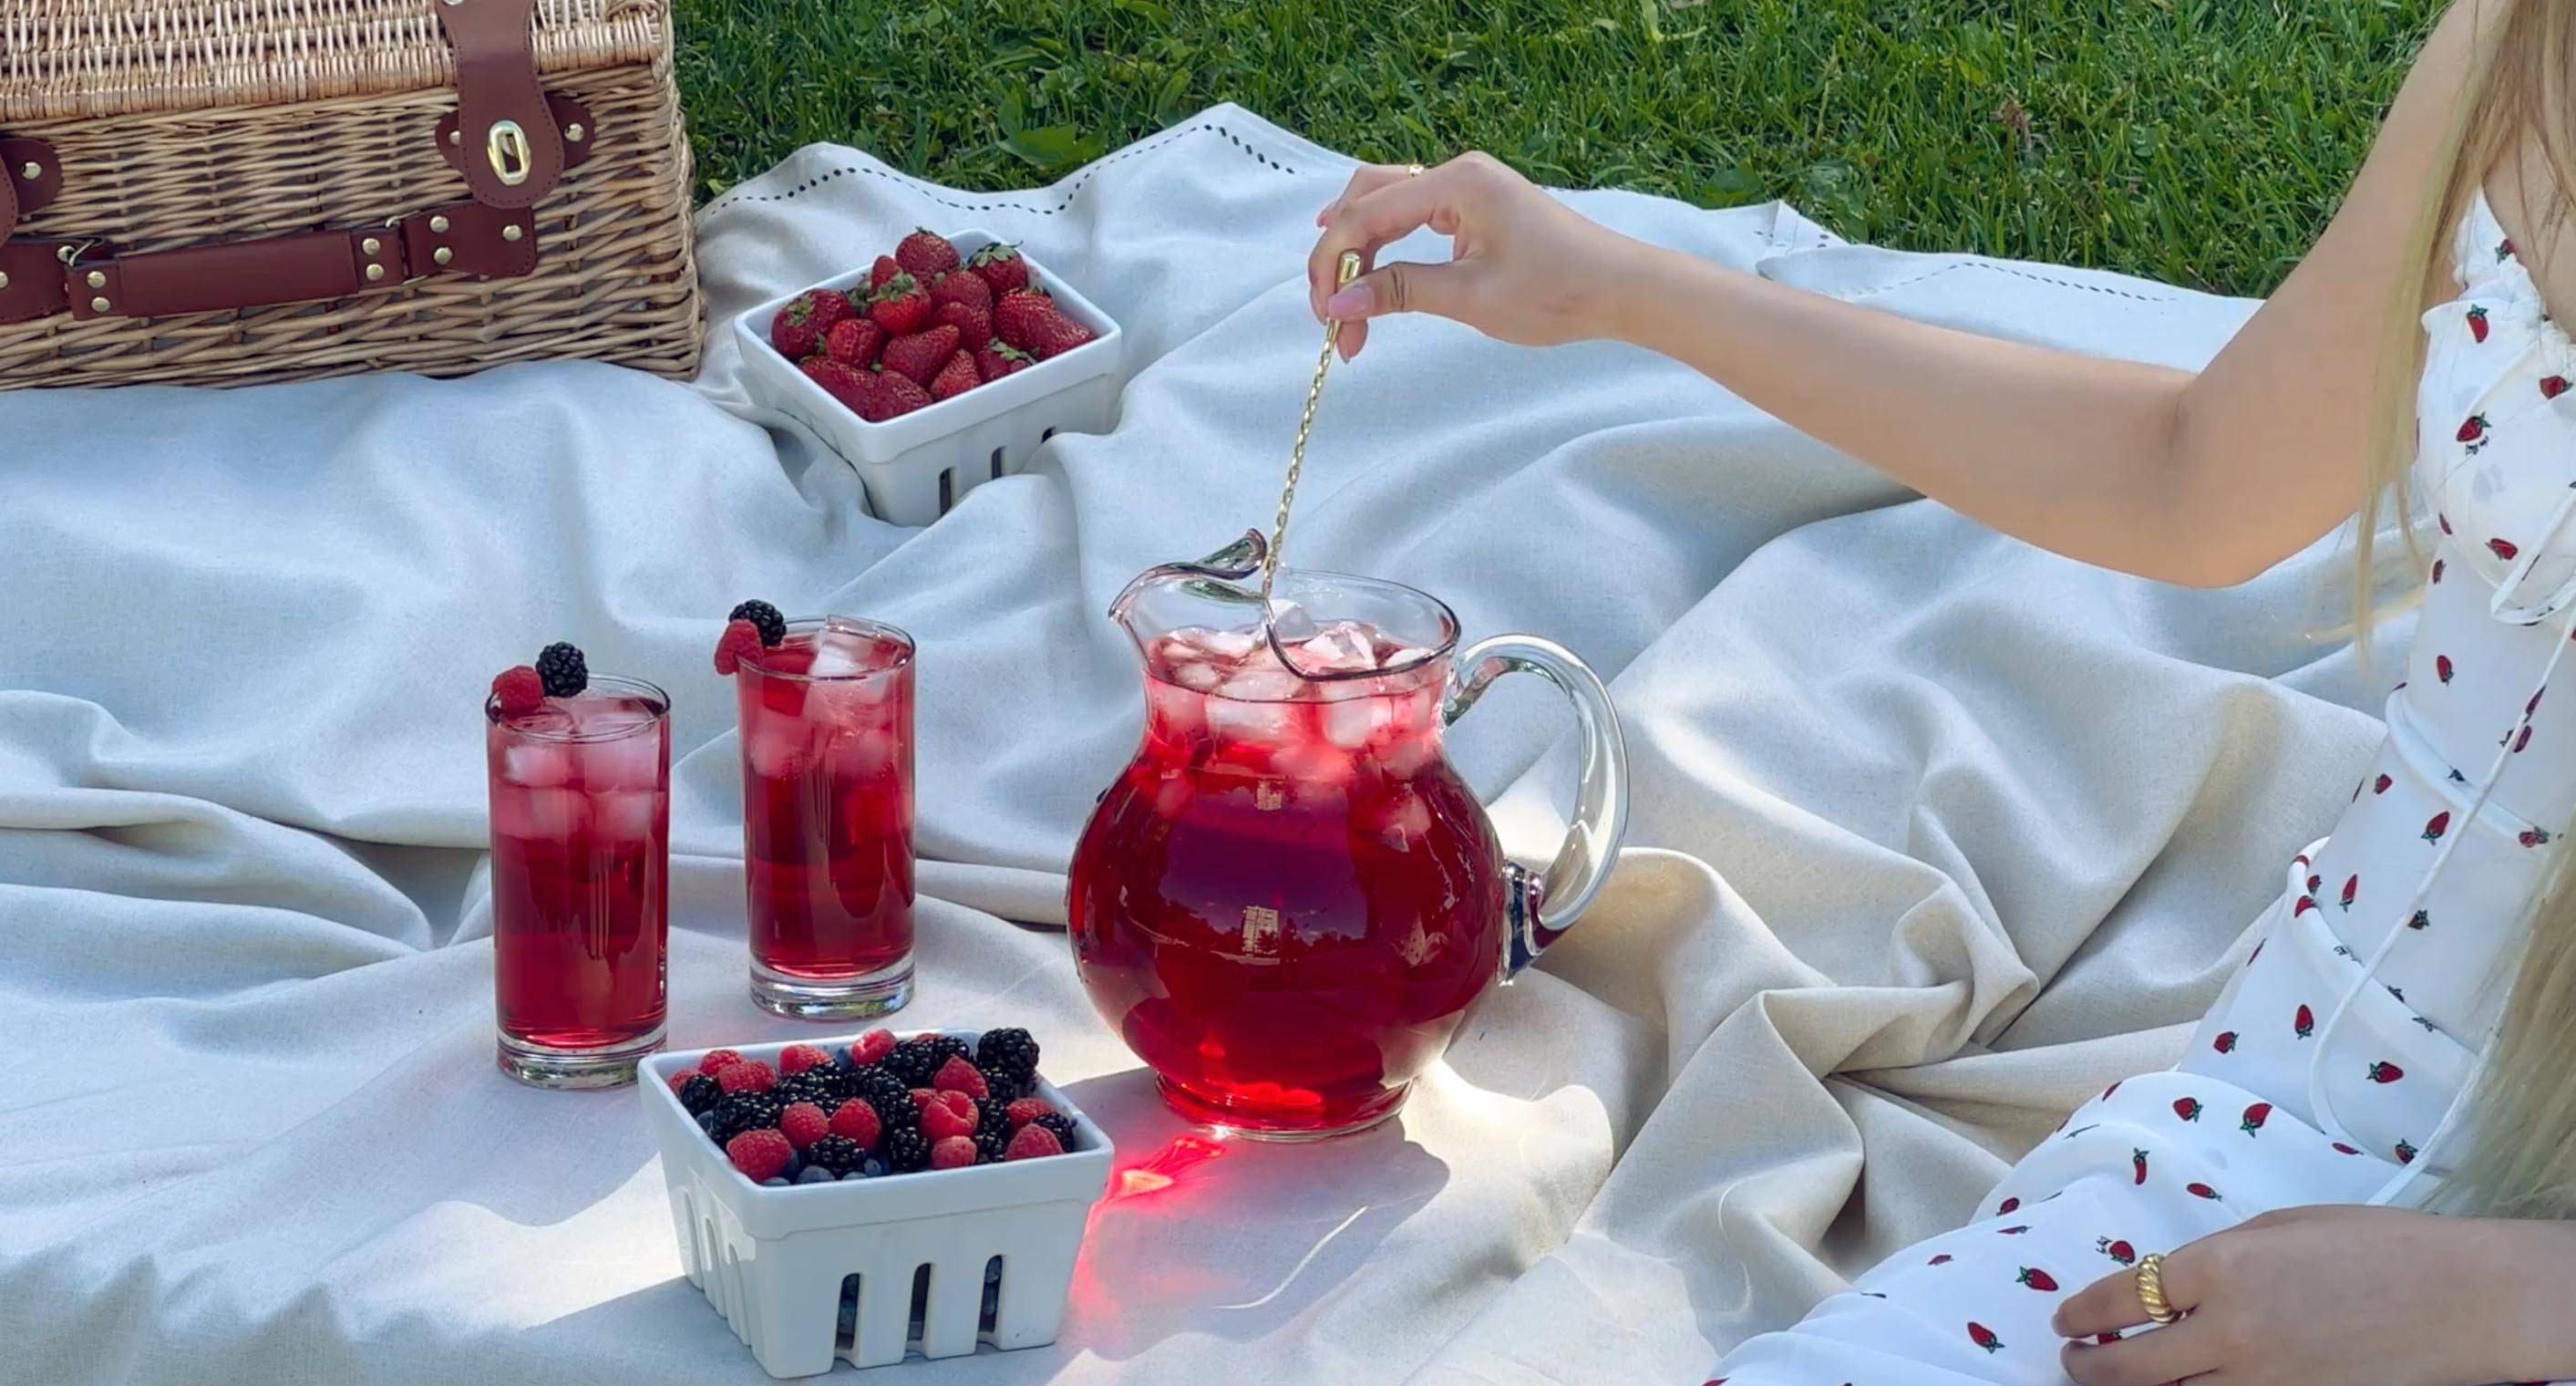 Picnic with girl stirring tea leaves berry iced tea in pitcher and two glasses  